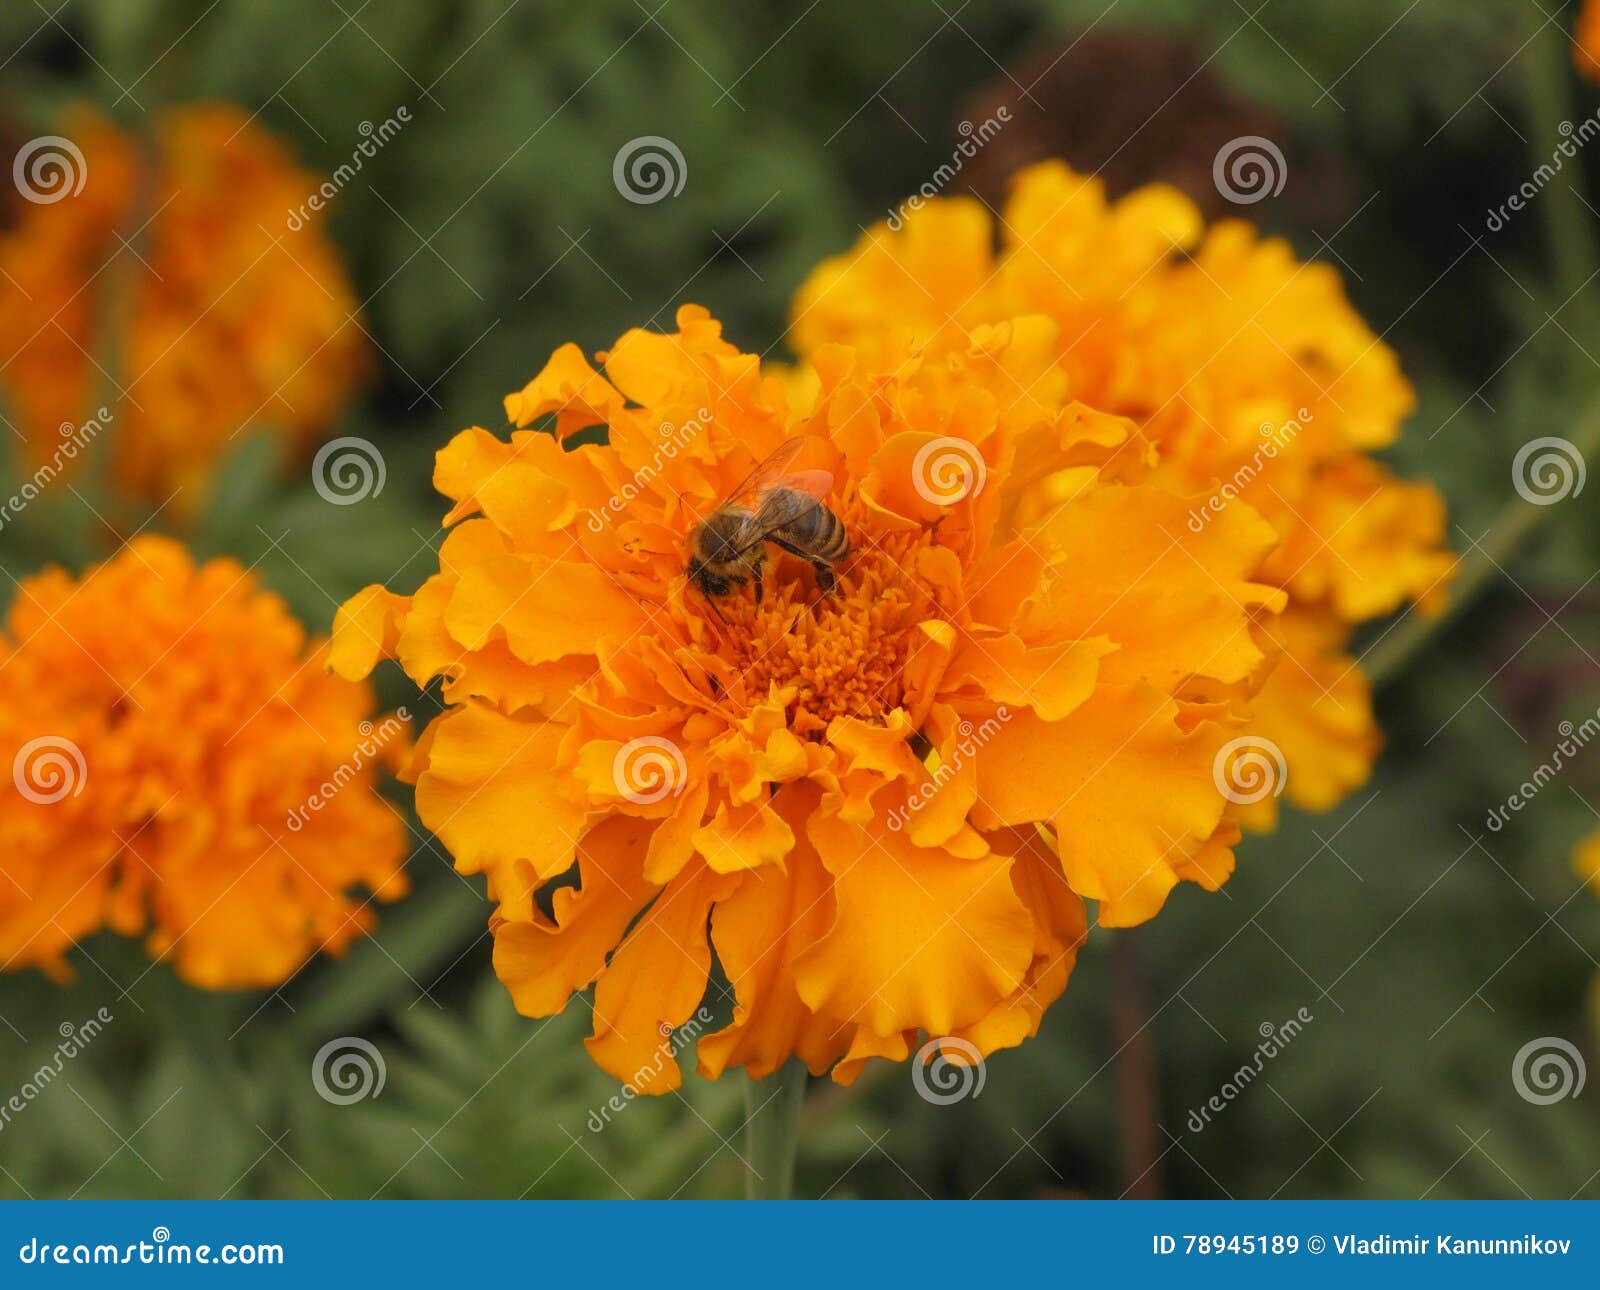 Tagetes flower and bee stock image. Image of tagetes - 78945189